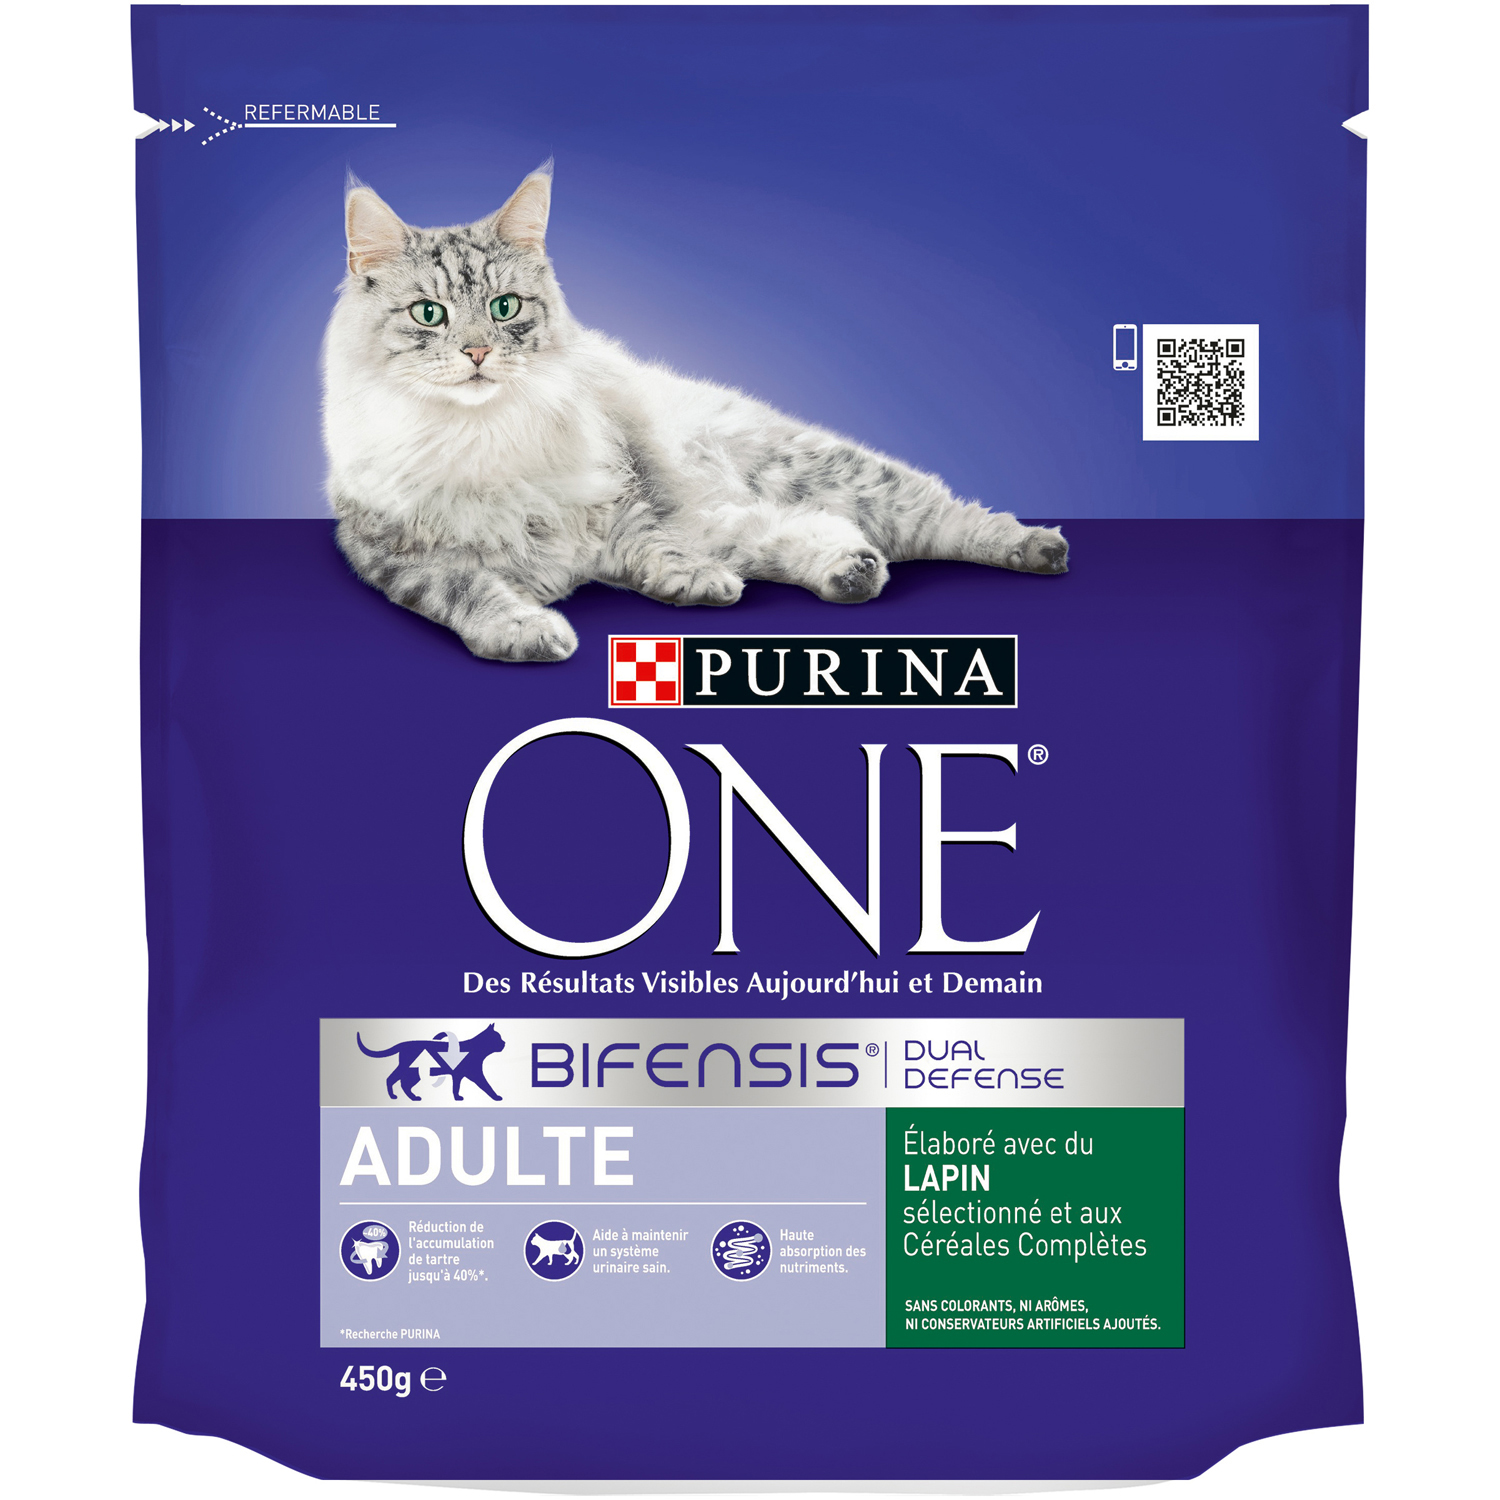 PURINA ONE Purina One croquette au lapin chat adulte 450g pas cher 